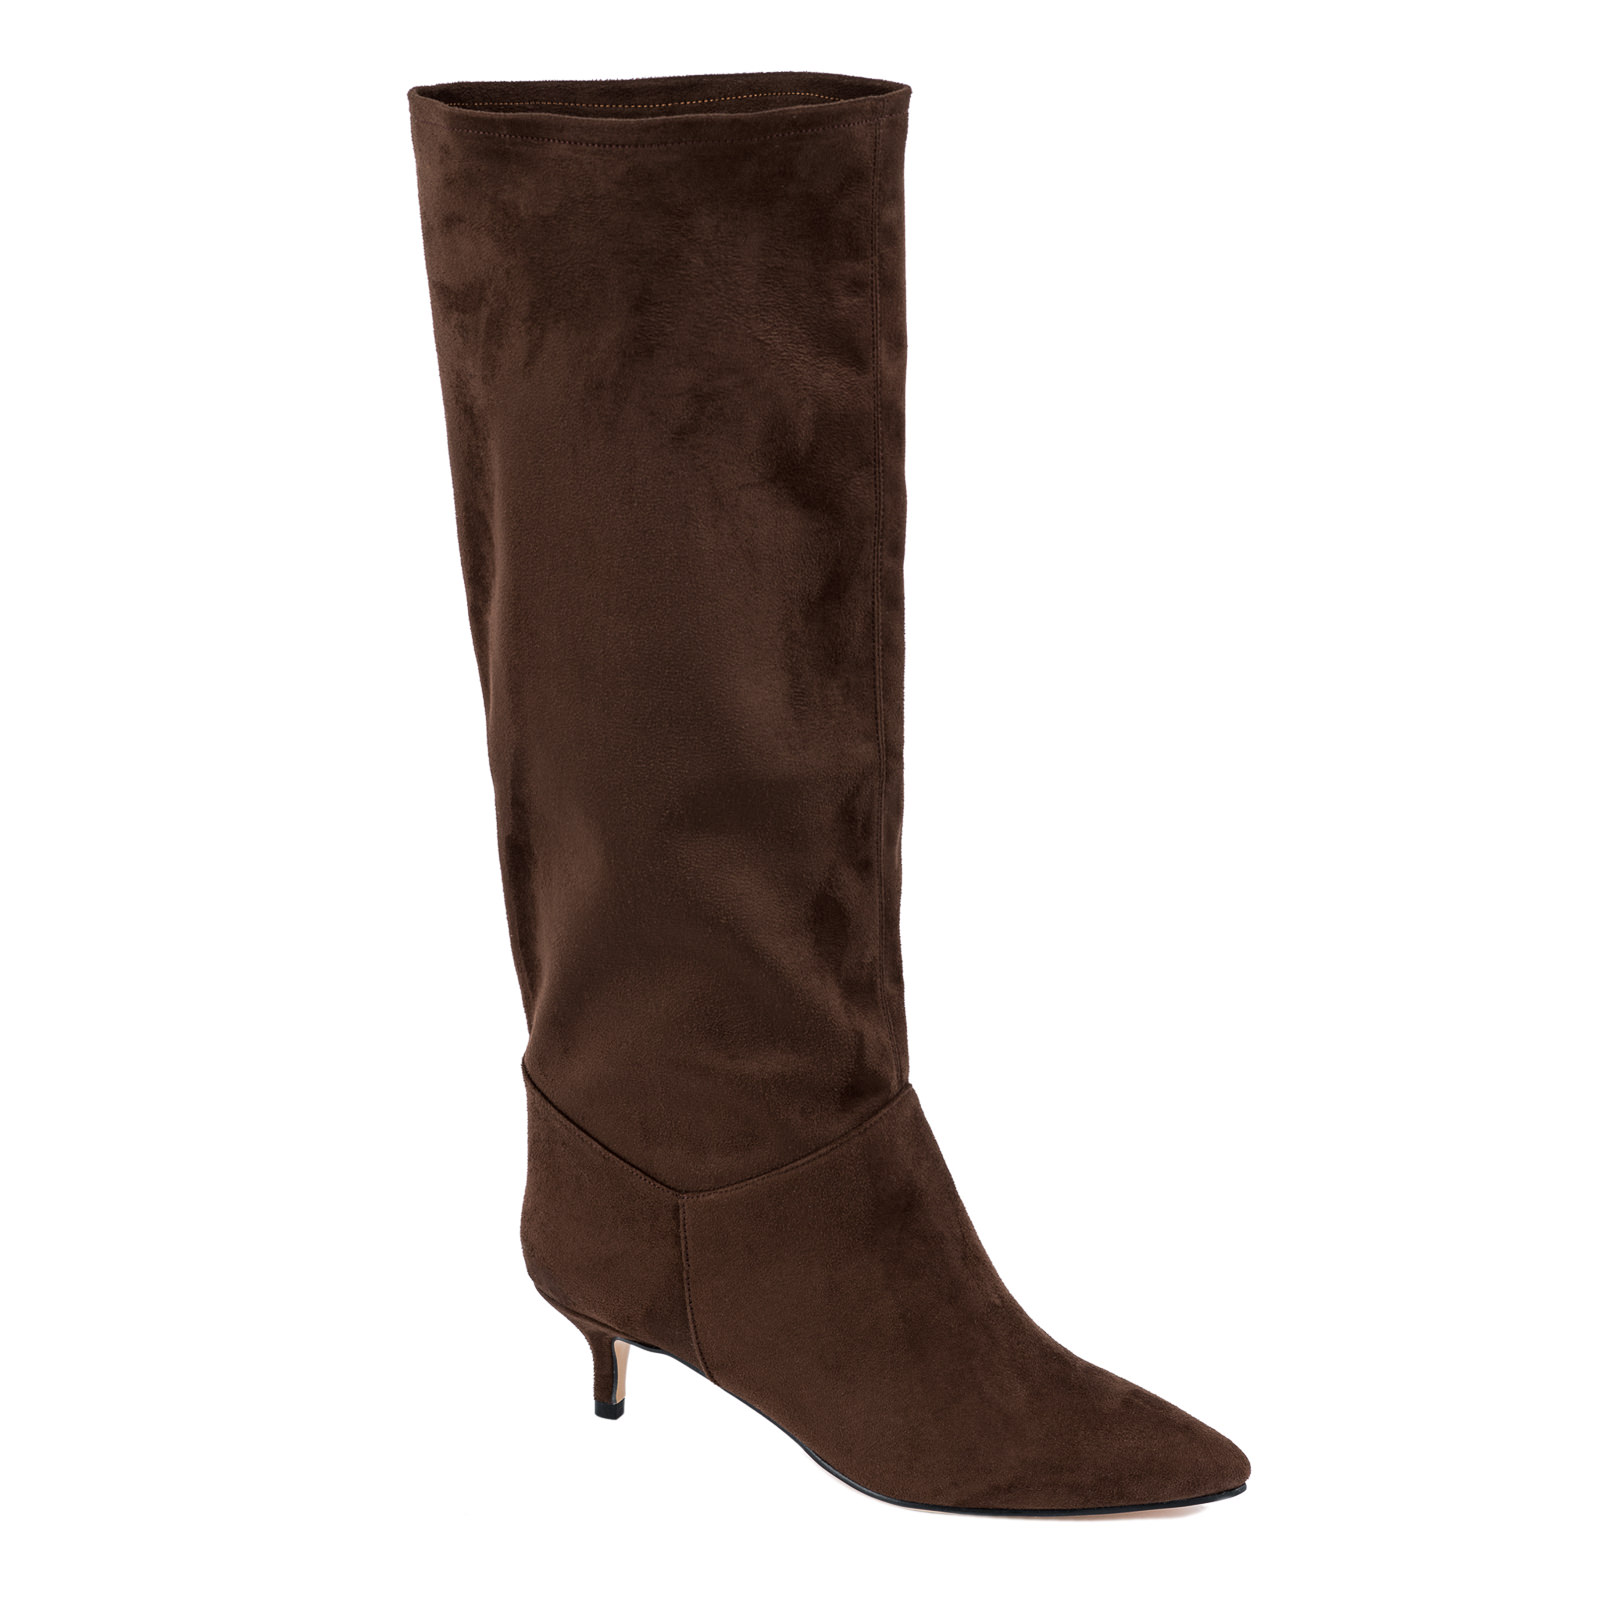 VELOUR POINTED HIGH BOOTS WITH THIN HEEL - BROWN